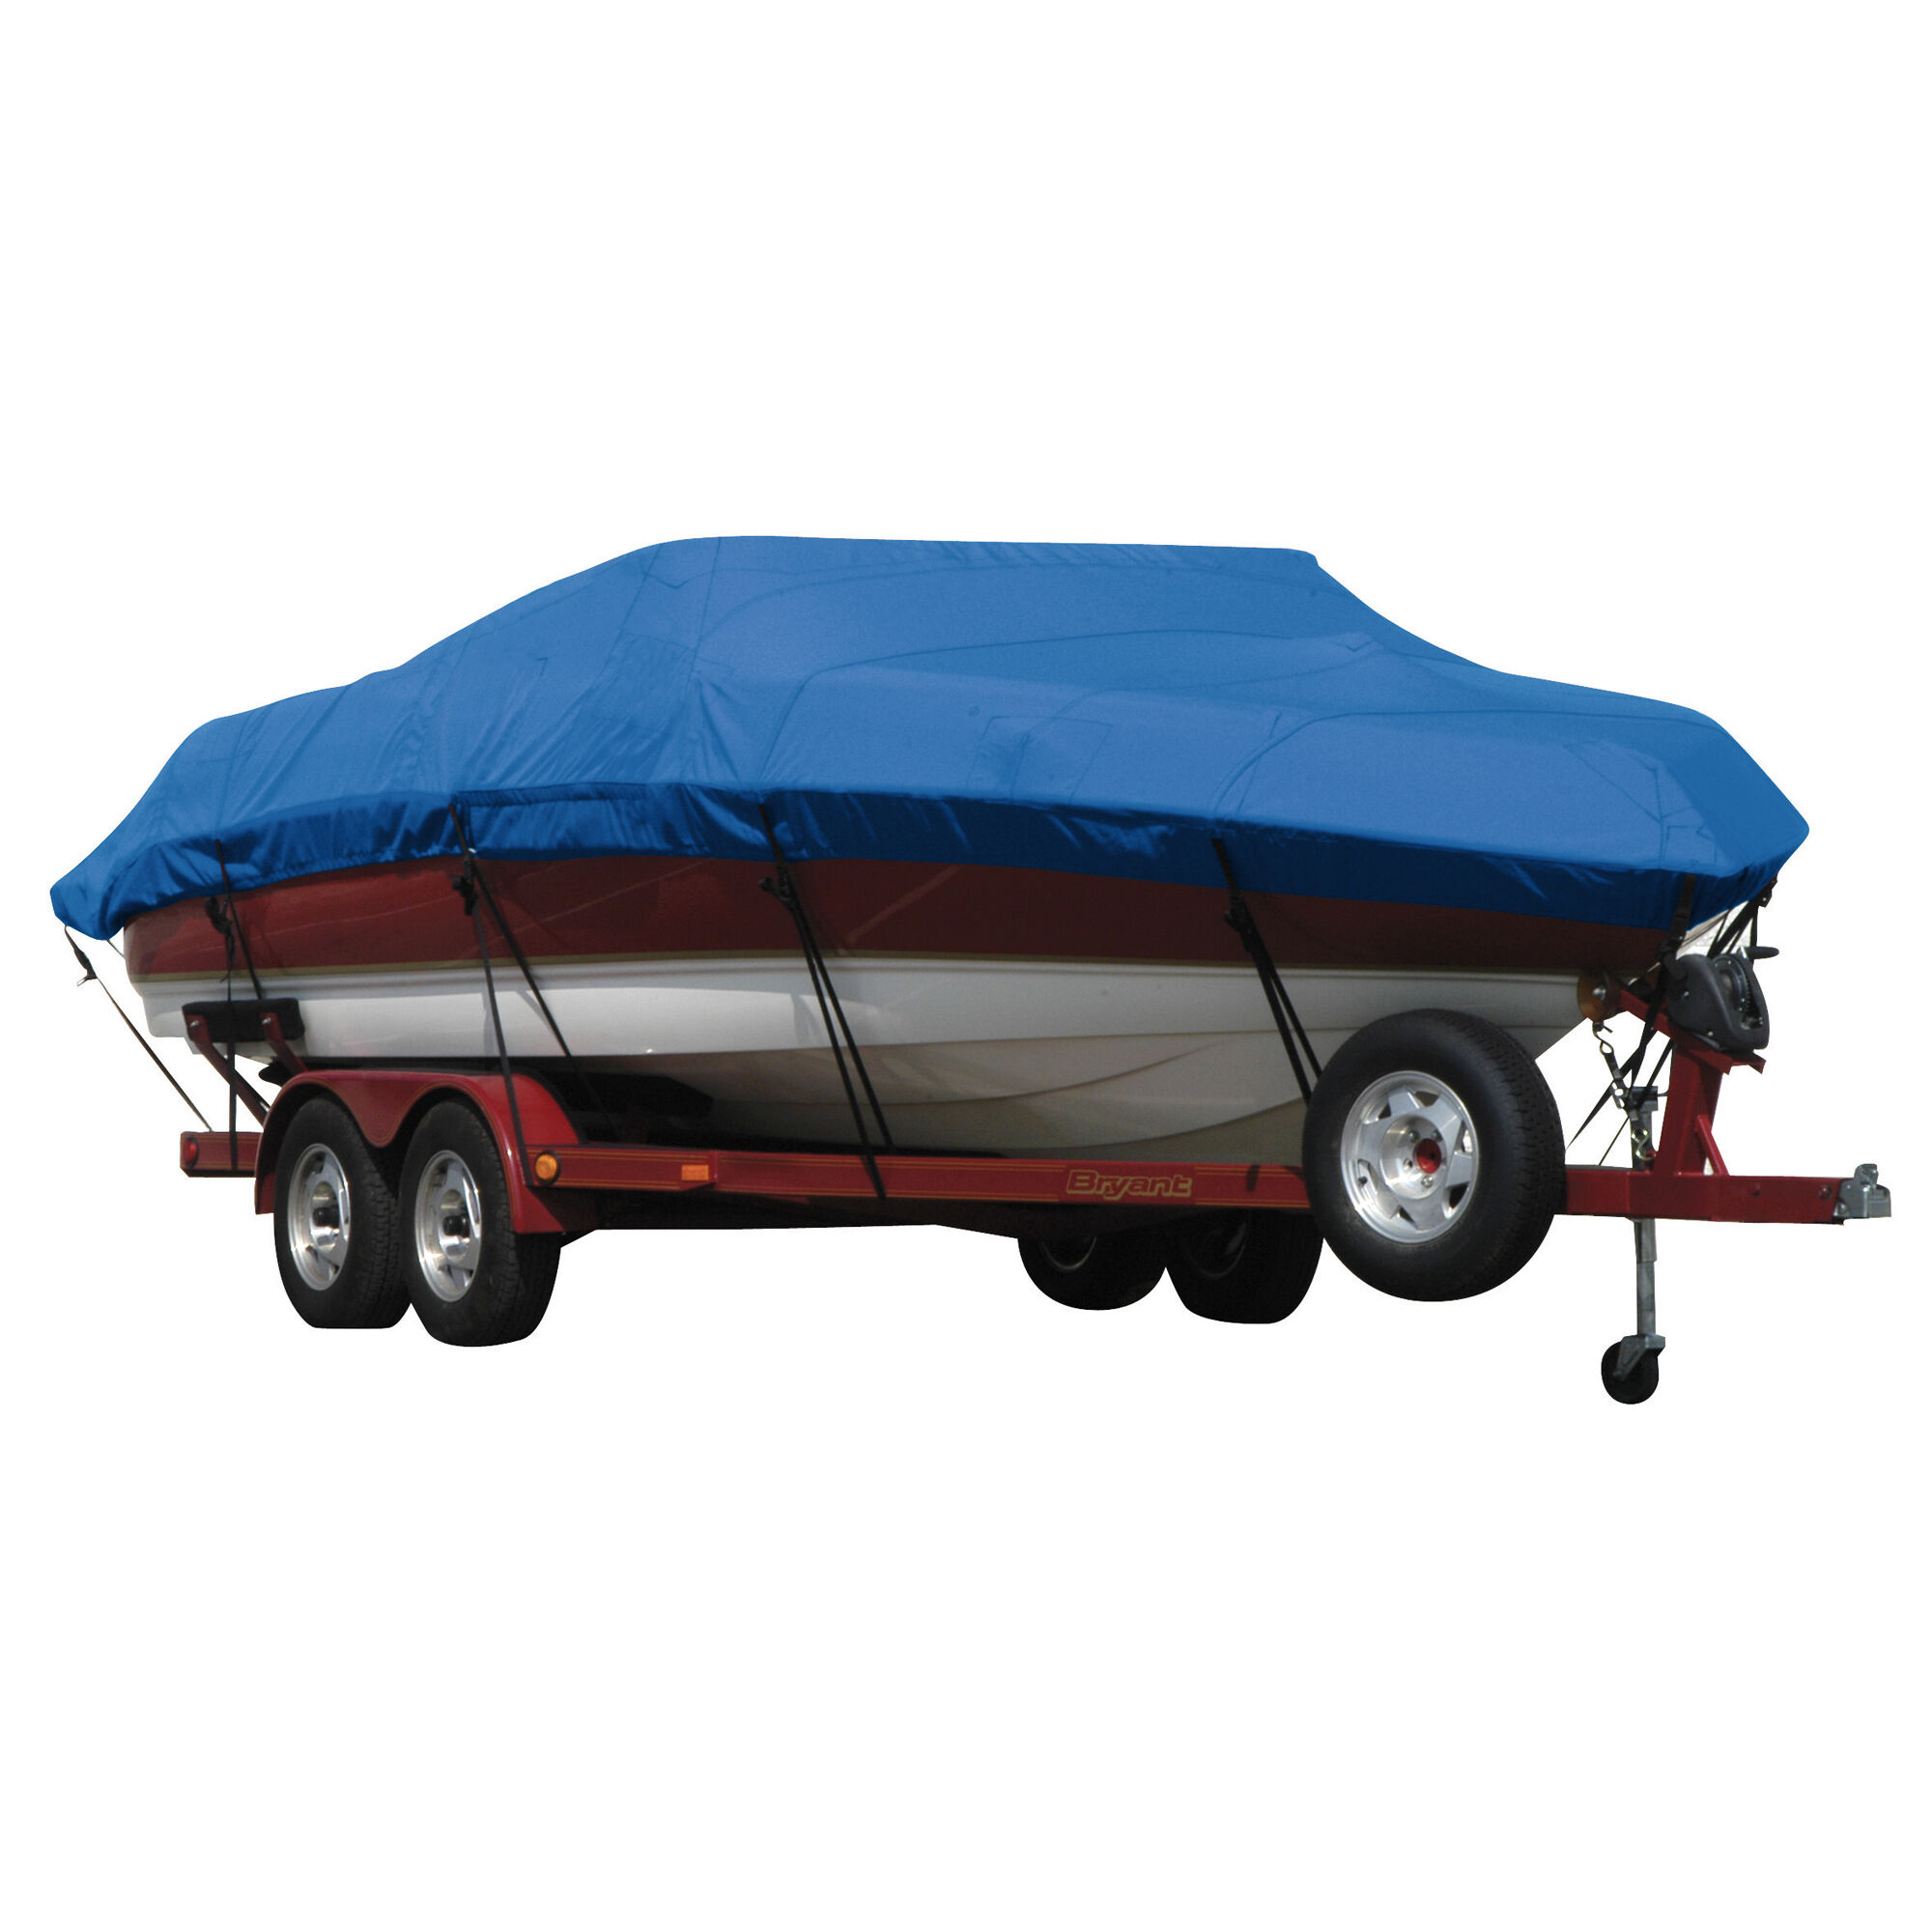 Covermate Exact Fit Sunbrella Boat Cover for Tahoe 220 220 Deck Boat Doesn't Cover Ski Tow Bar Bimini Laid Aft I/O. Pacific Blue